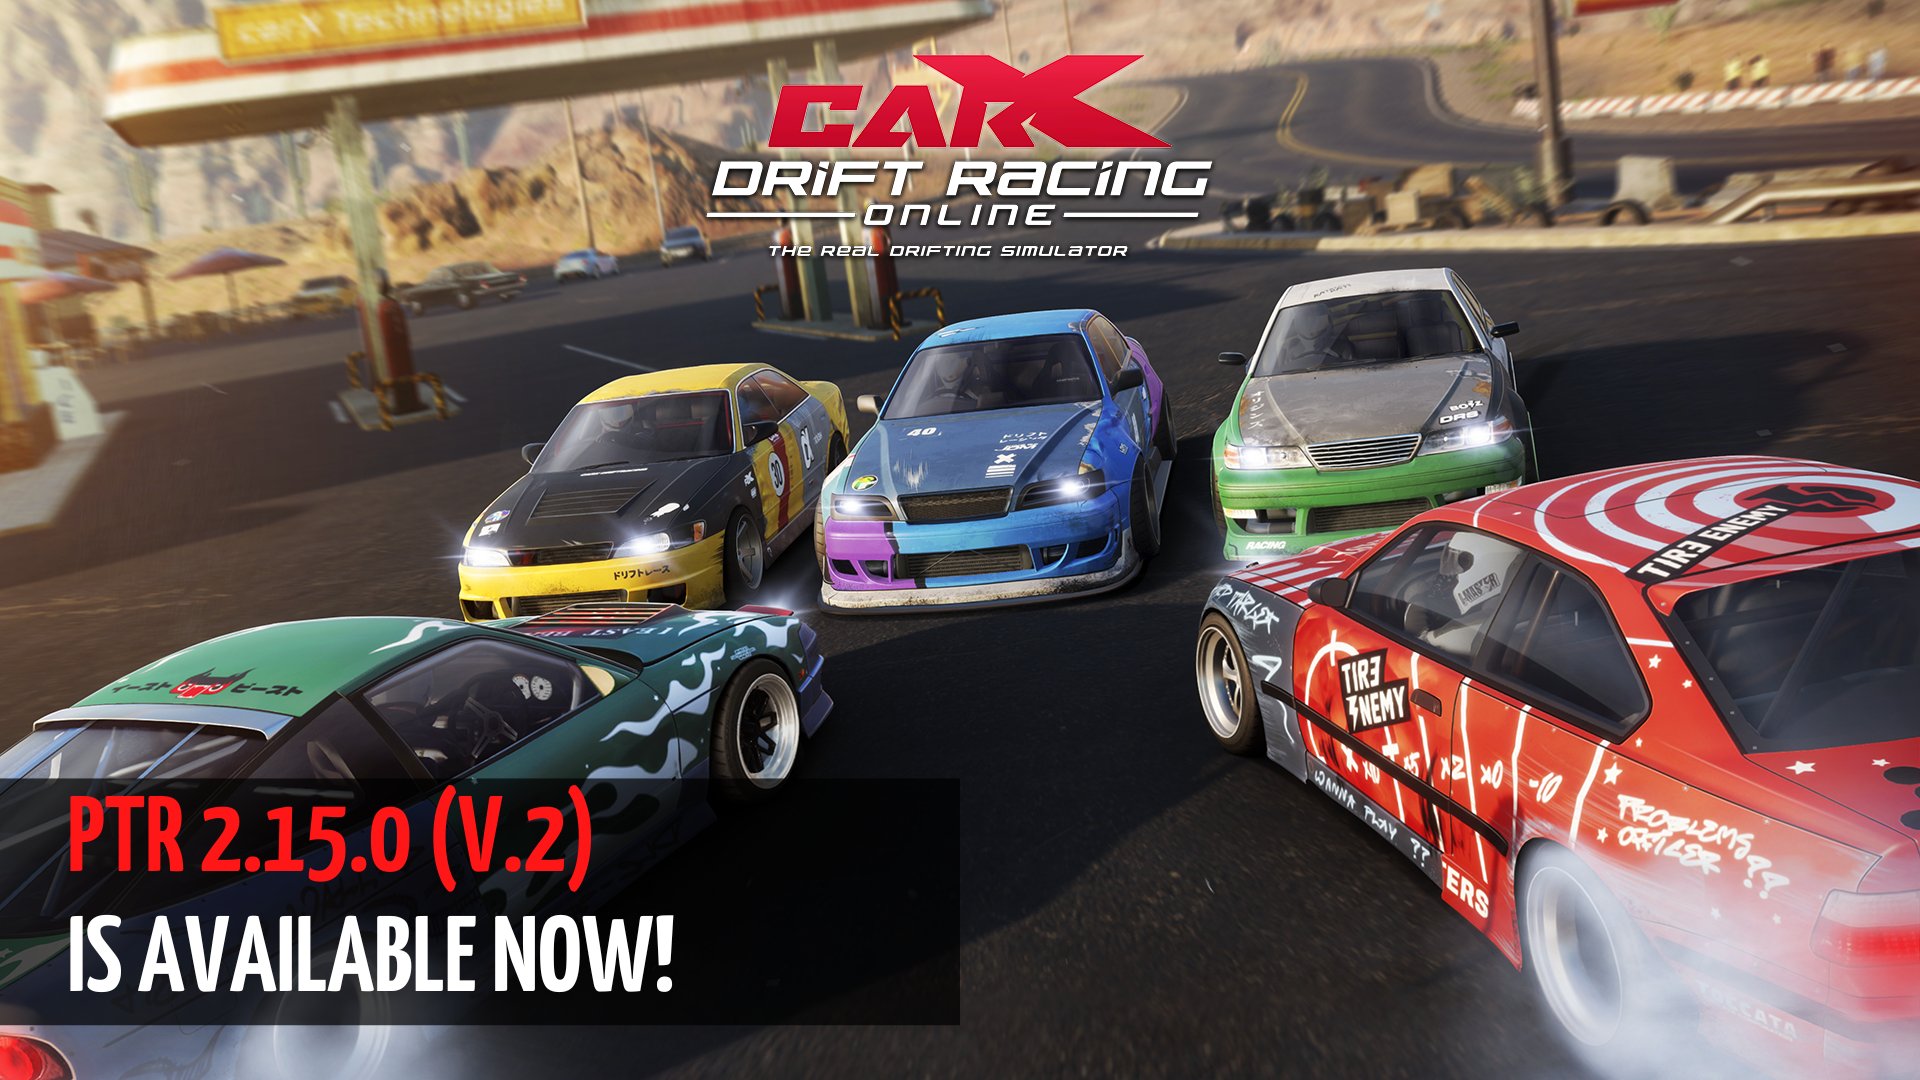 CarX Technologies on X: Hello everyone. PTR 2.18.0 for CarX Drift